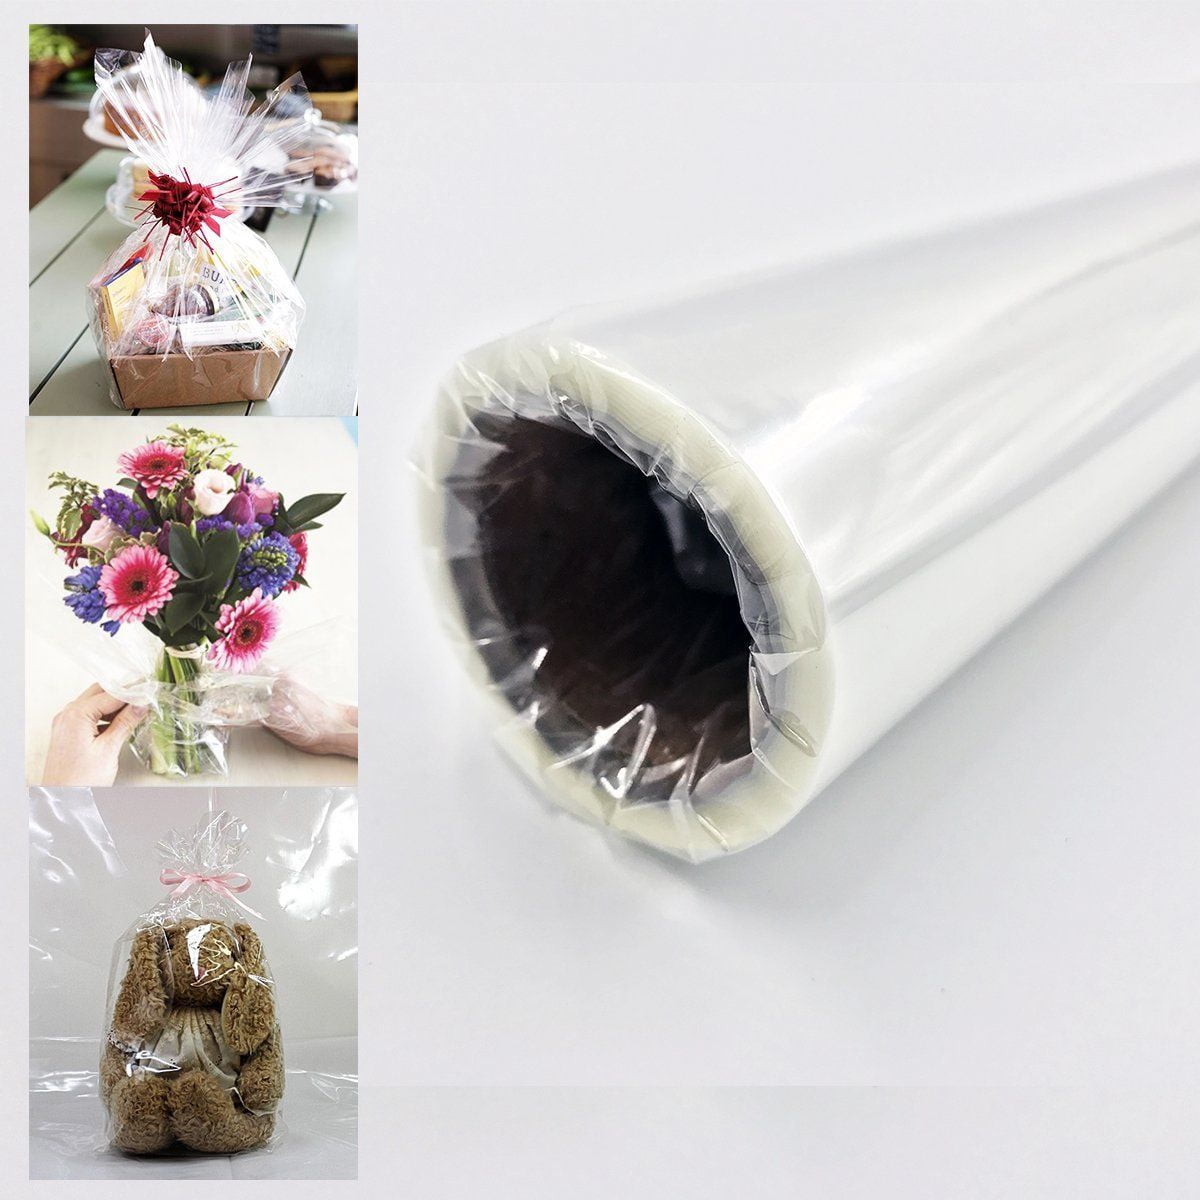 1 Roll Cellophane Wrap White Dots 2.5 Mil Thickness Packaging cellophane roll Film Clear Cellophane Paper for Bouquet Gift Baskets Arts & Crafts